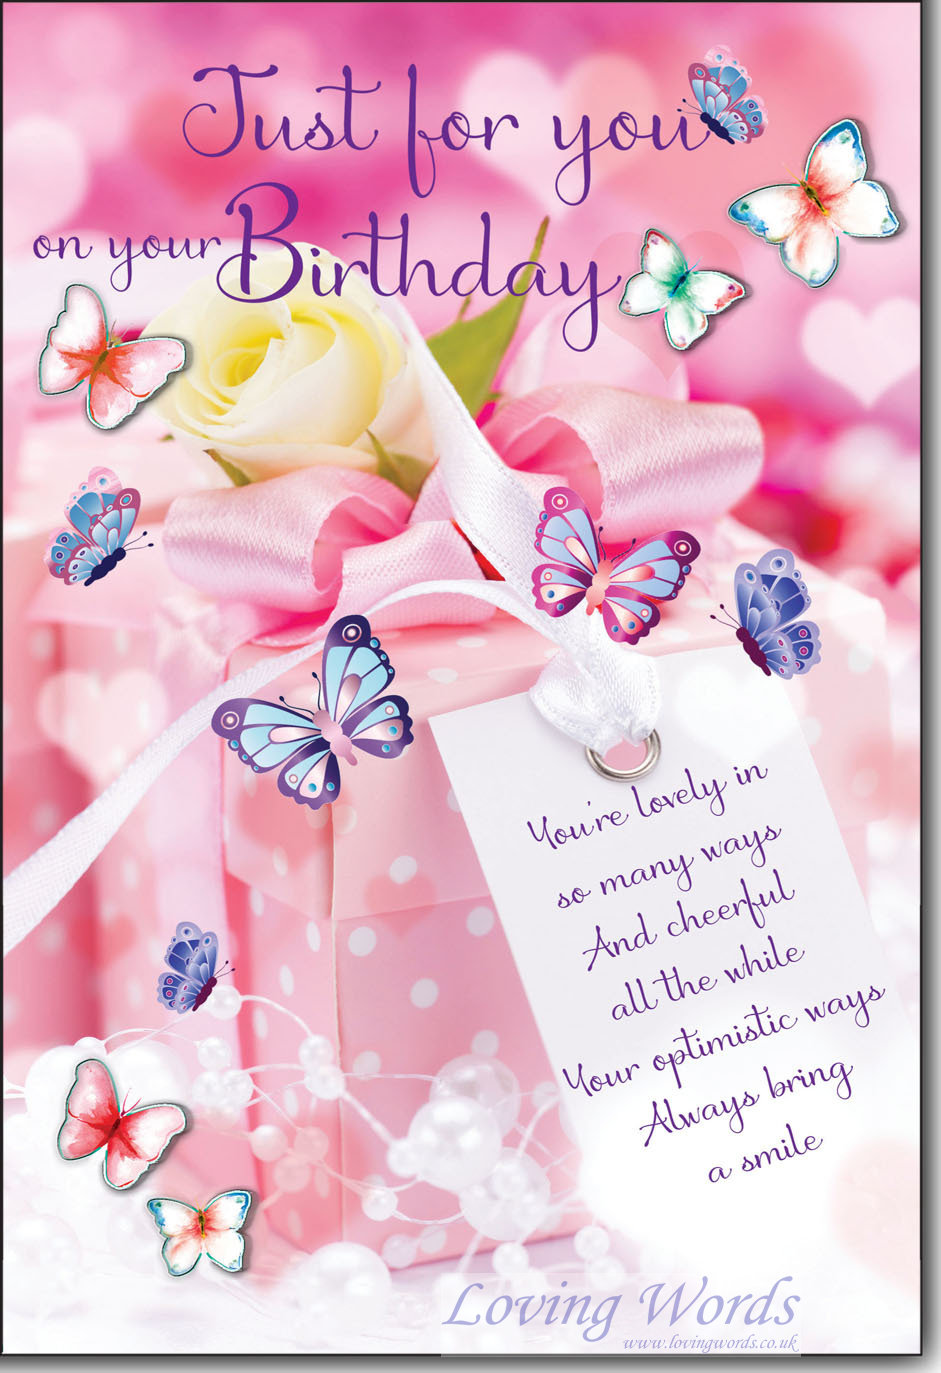 Just for you Birthday | Greeting Cards by Loving Words